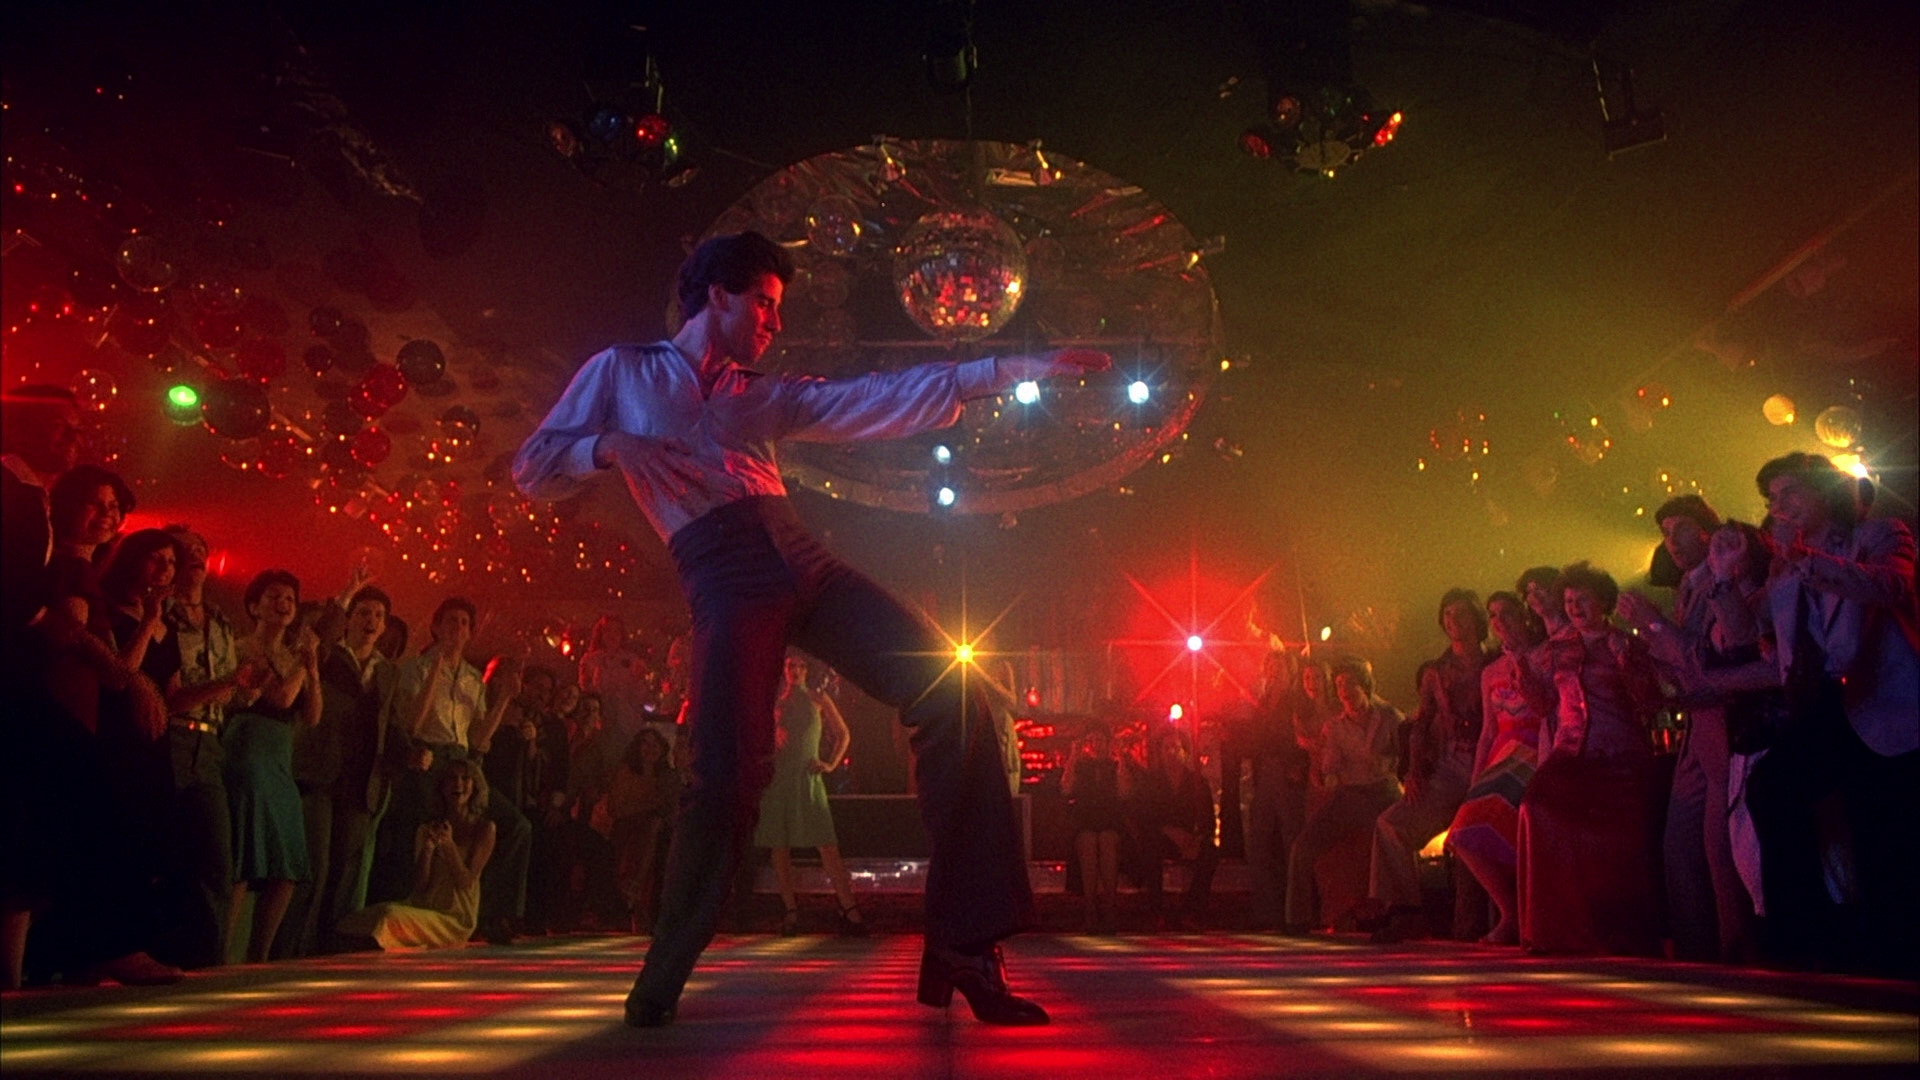 Saturday Night Fever Pictures Wallpaper